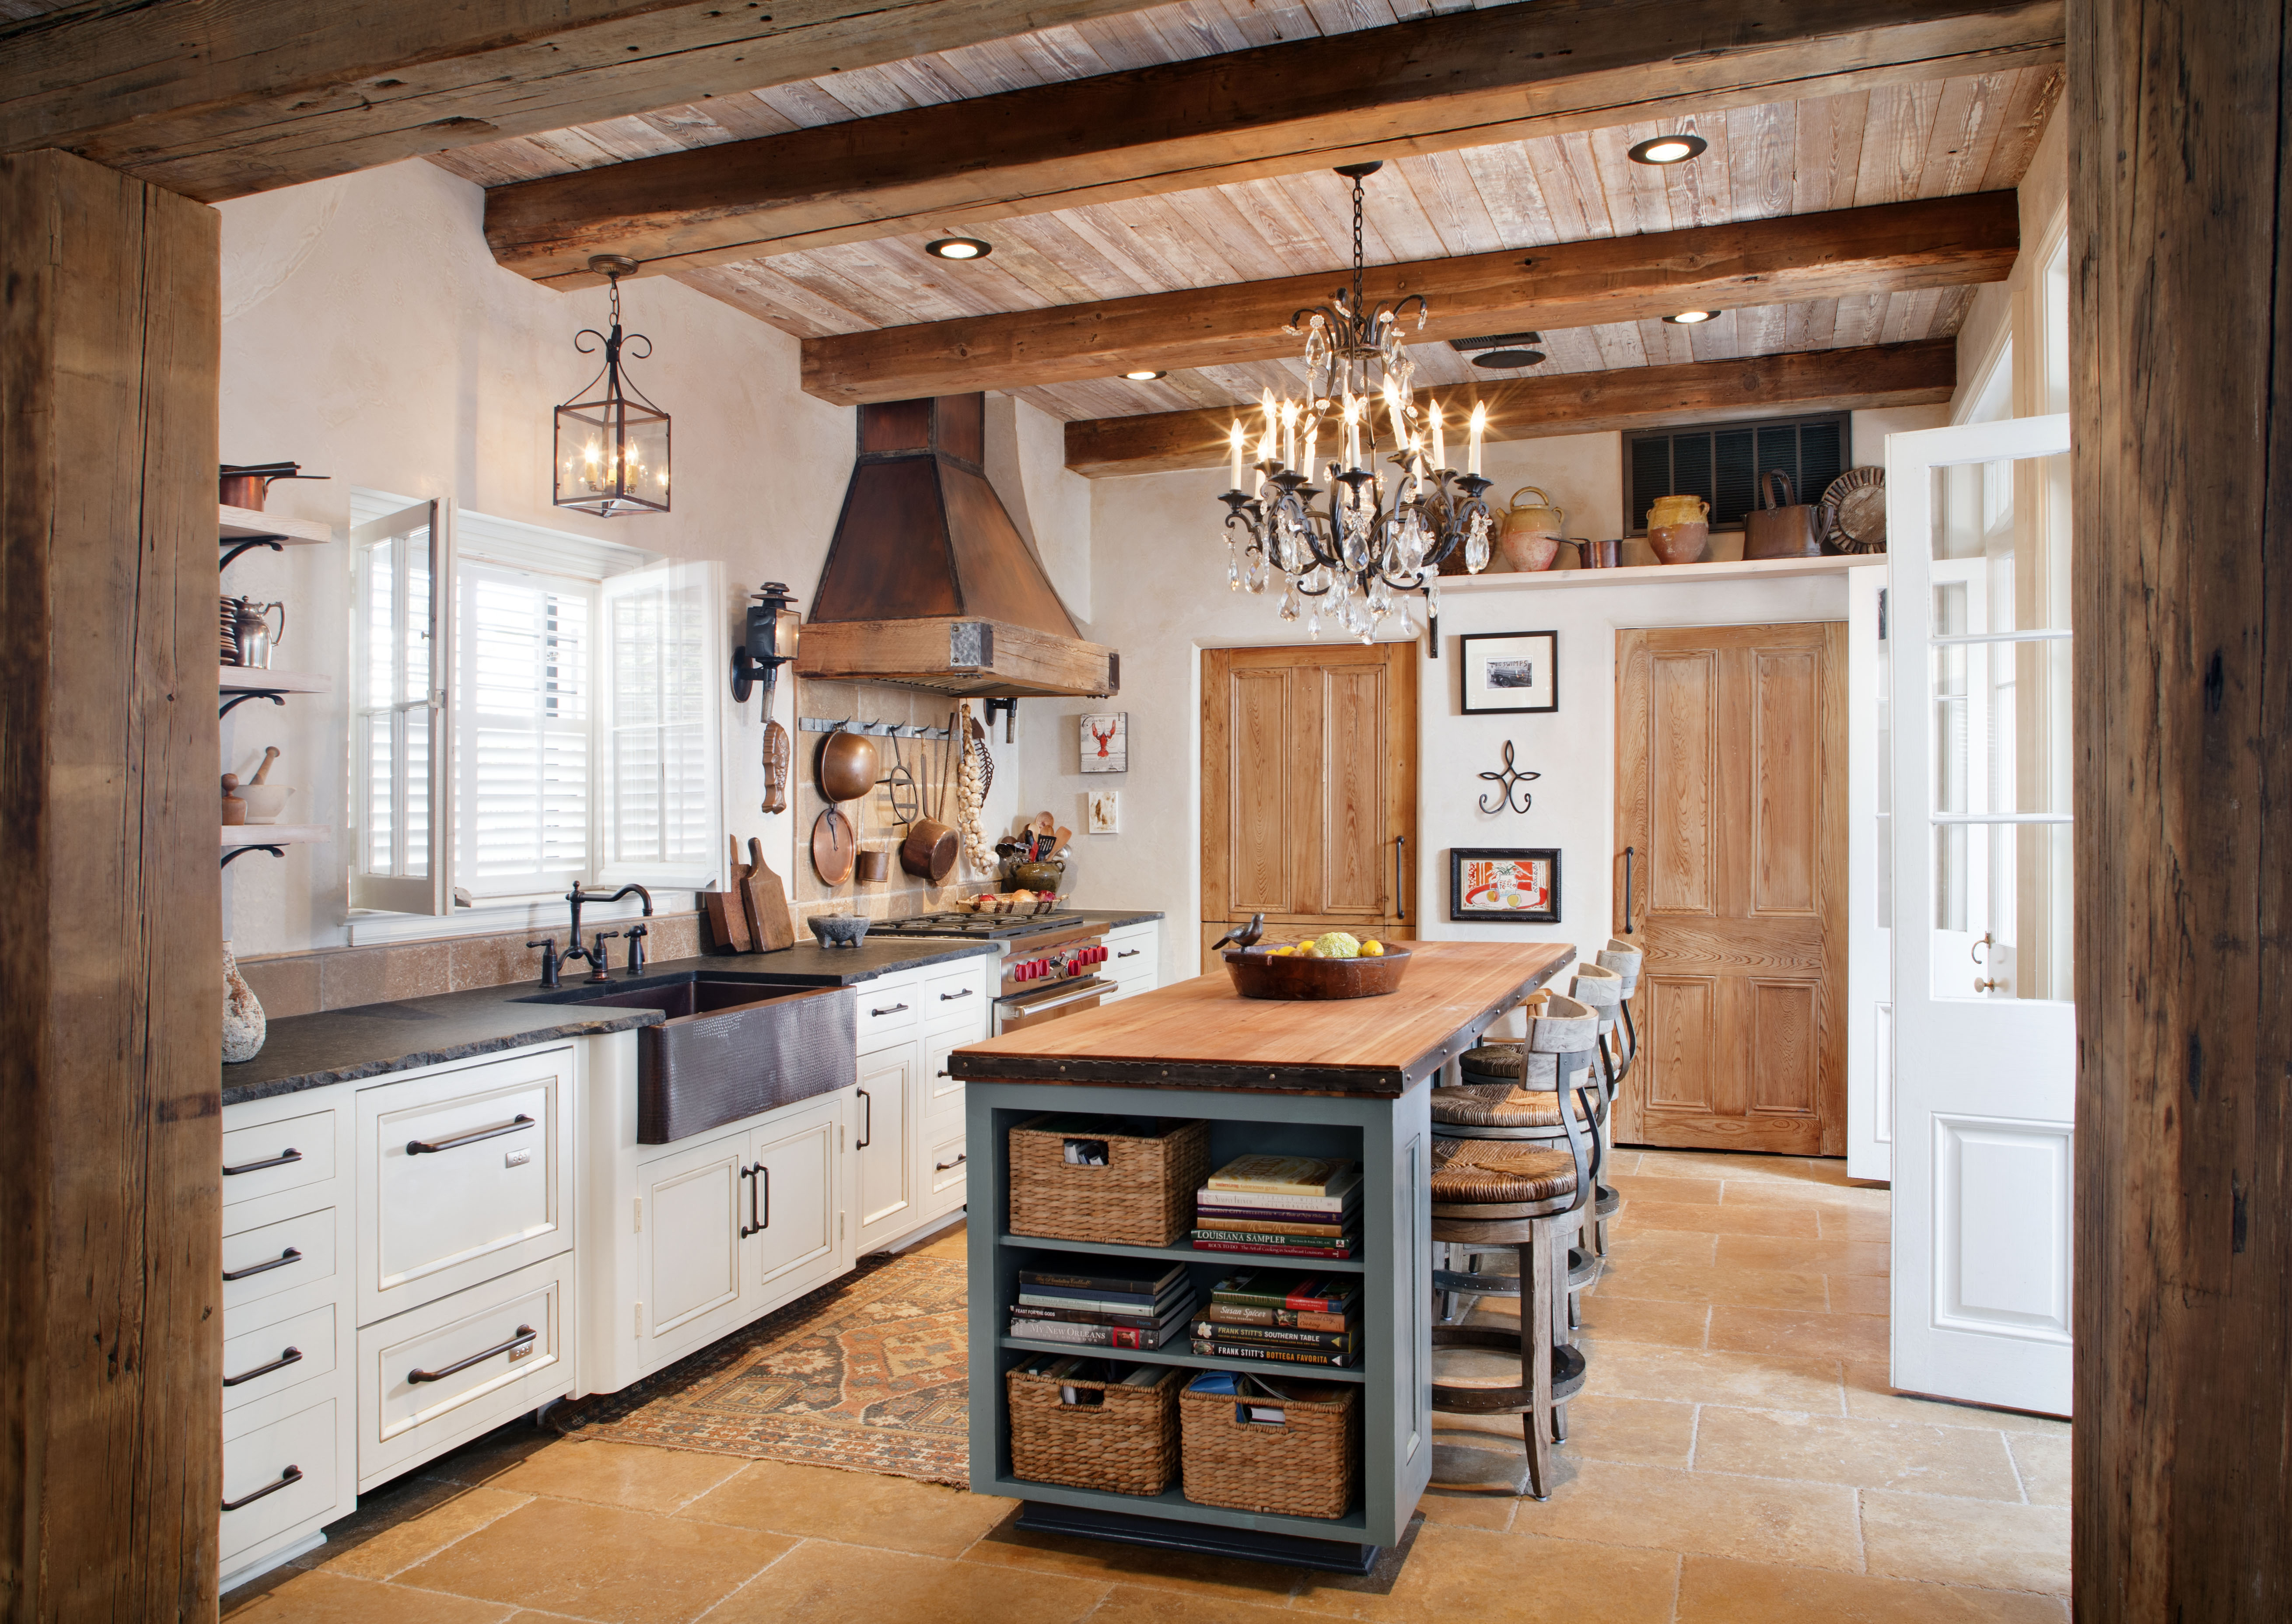 A French country style kitchen designed by Richard Ourso, CKD, CAPS. Co-designers included Vickie Mire, CKD, CAPS, Michelle Livings, AKBD, CAPS, LEED.